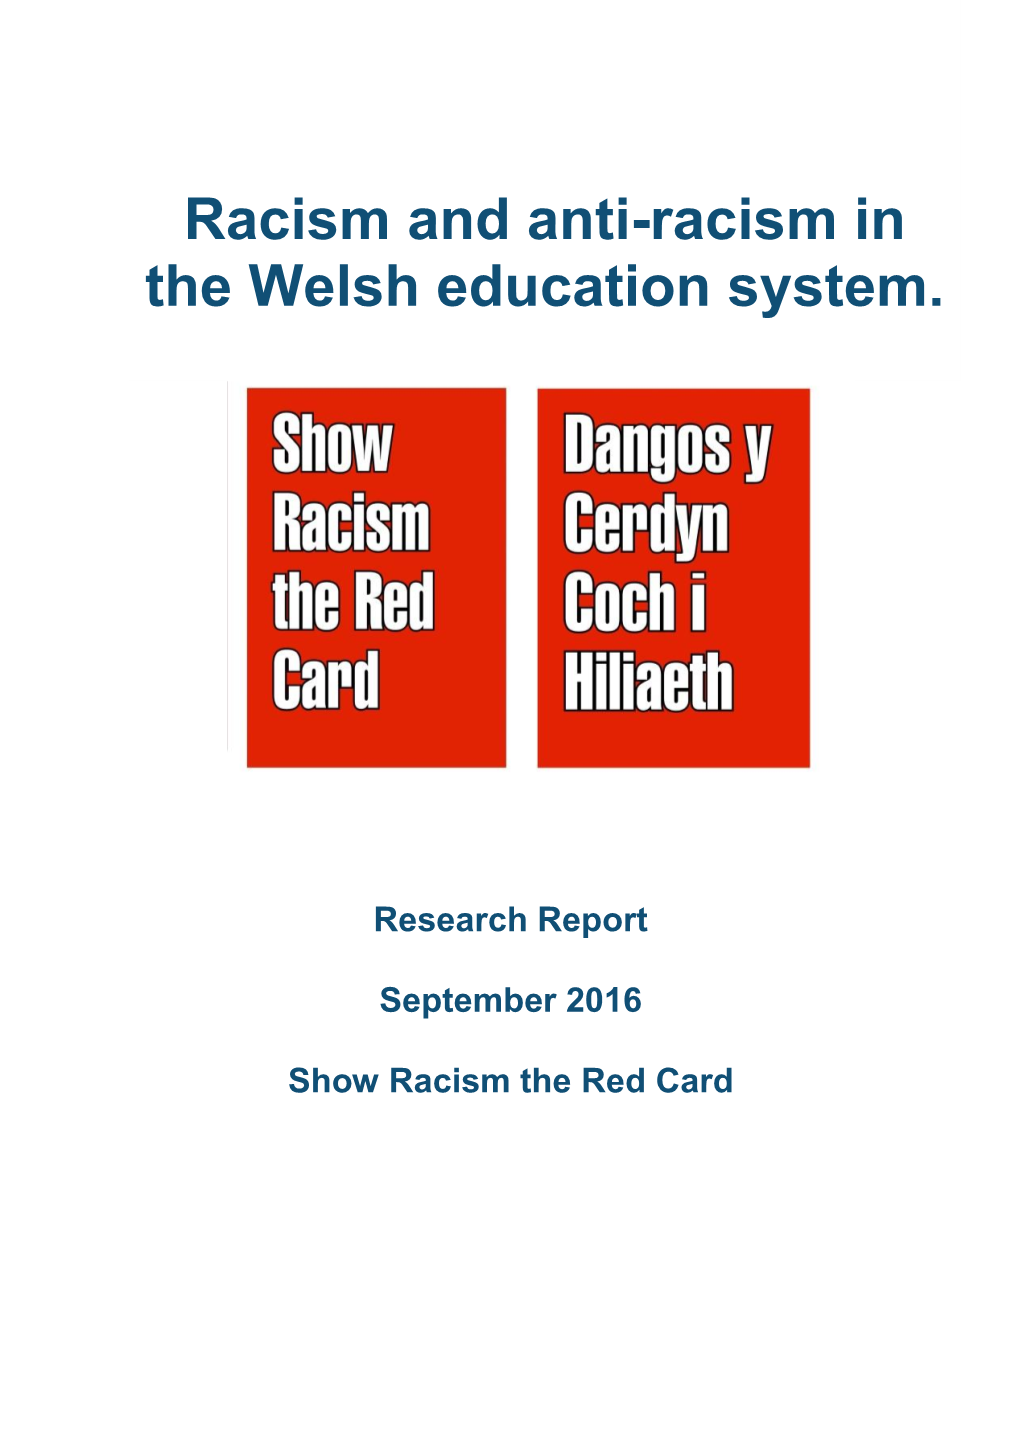 How Do Schools Promote Anti-Racism in the Welsh Education System?